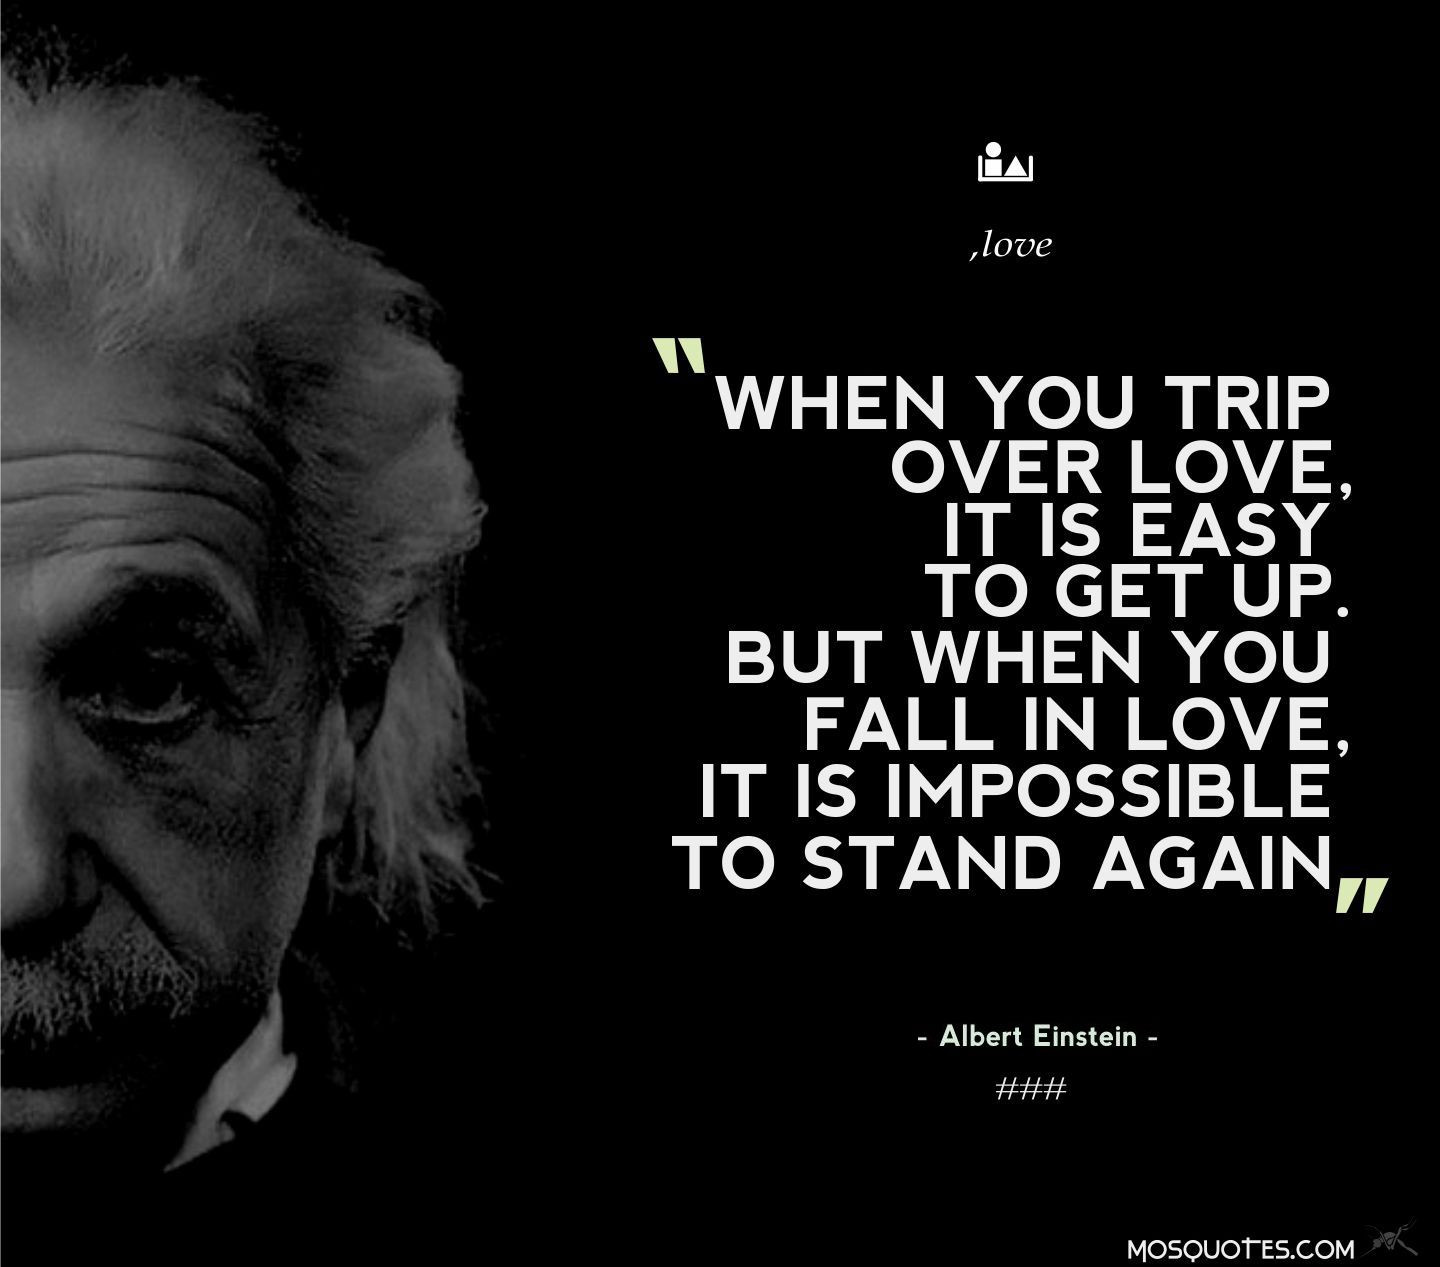 Albert Einstein Love Quotes
 When you trip over love it is easy to up